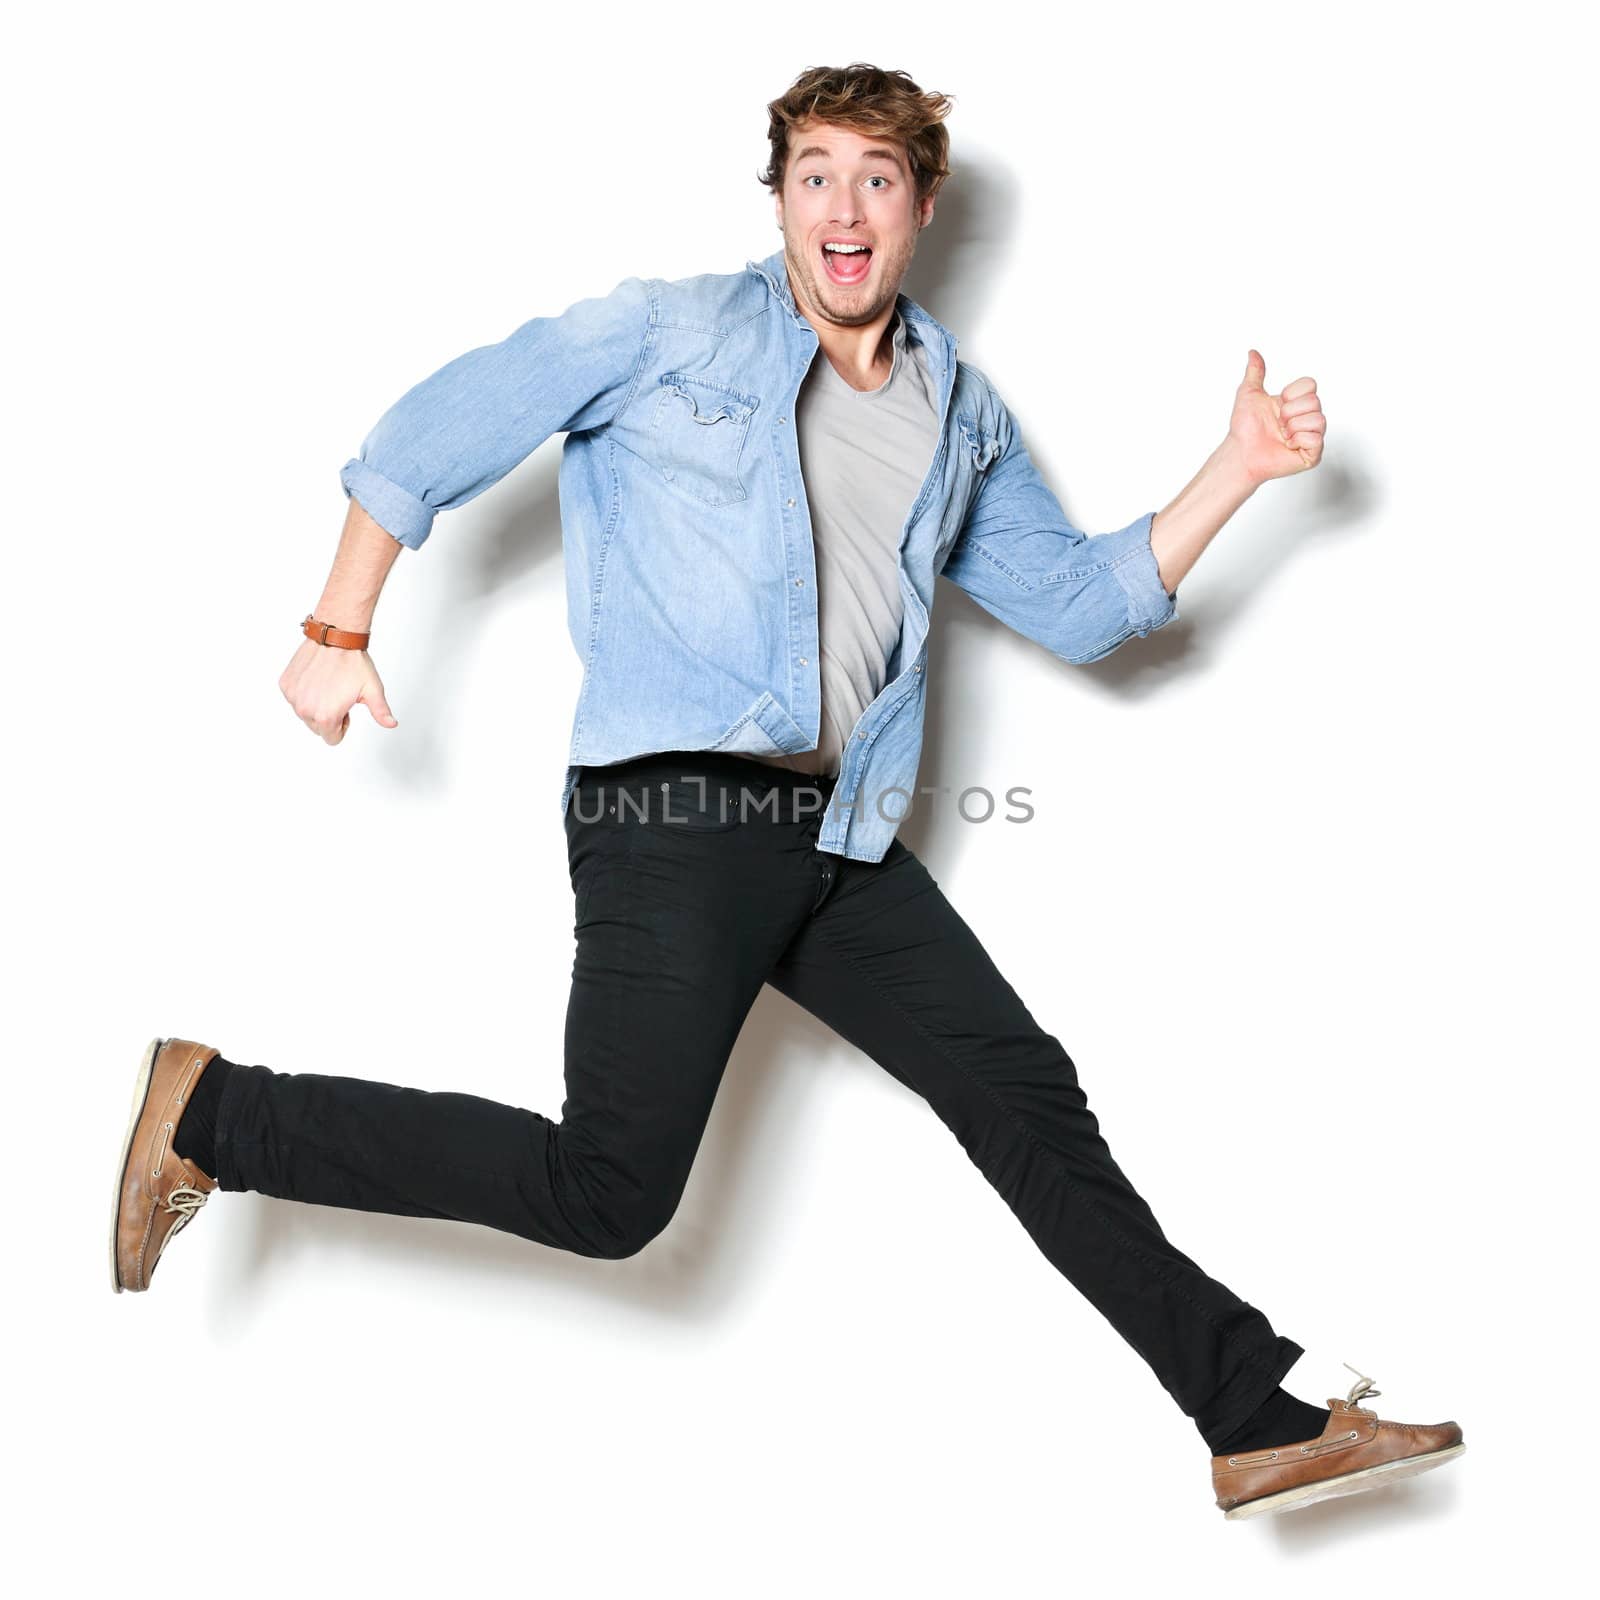 Jumping man happy excited. Funny portrait on young casual male male model in humorous jump on white background.